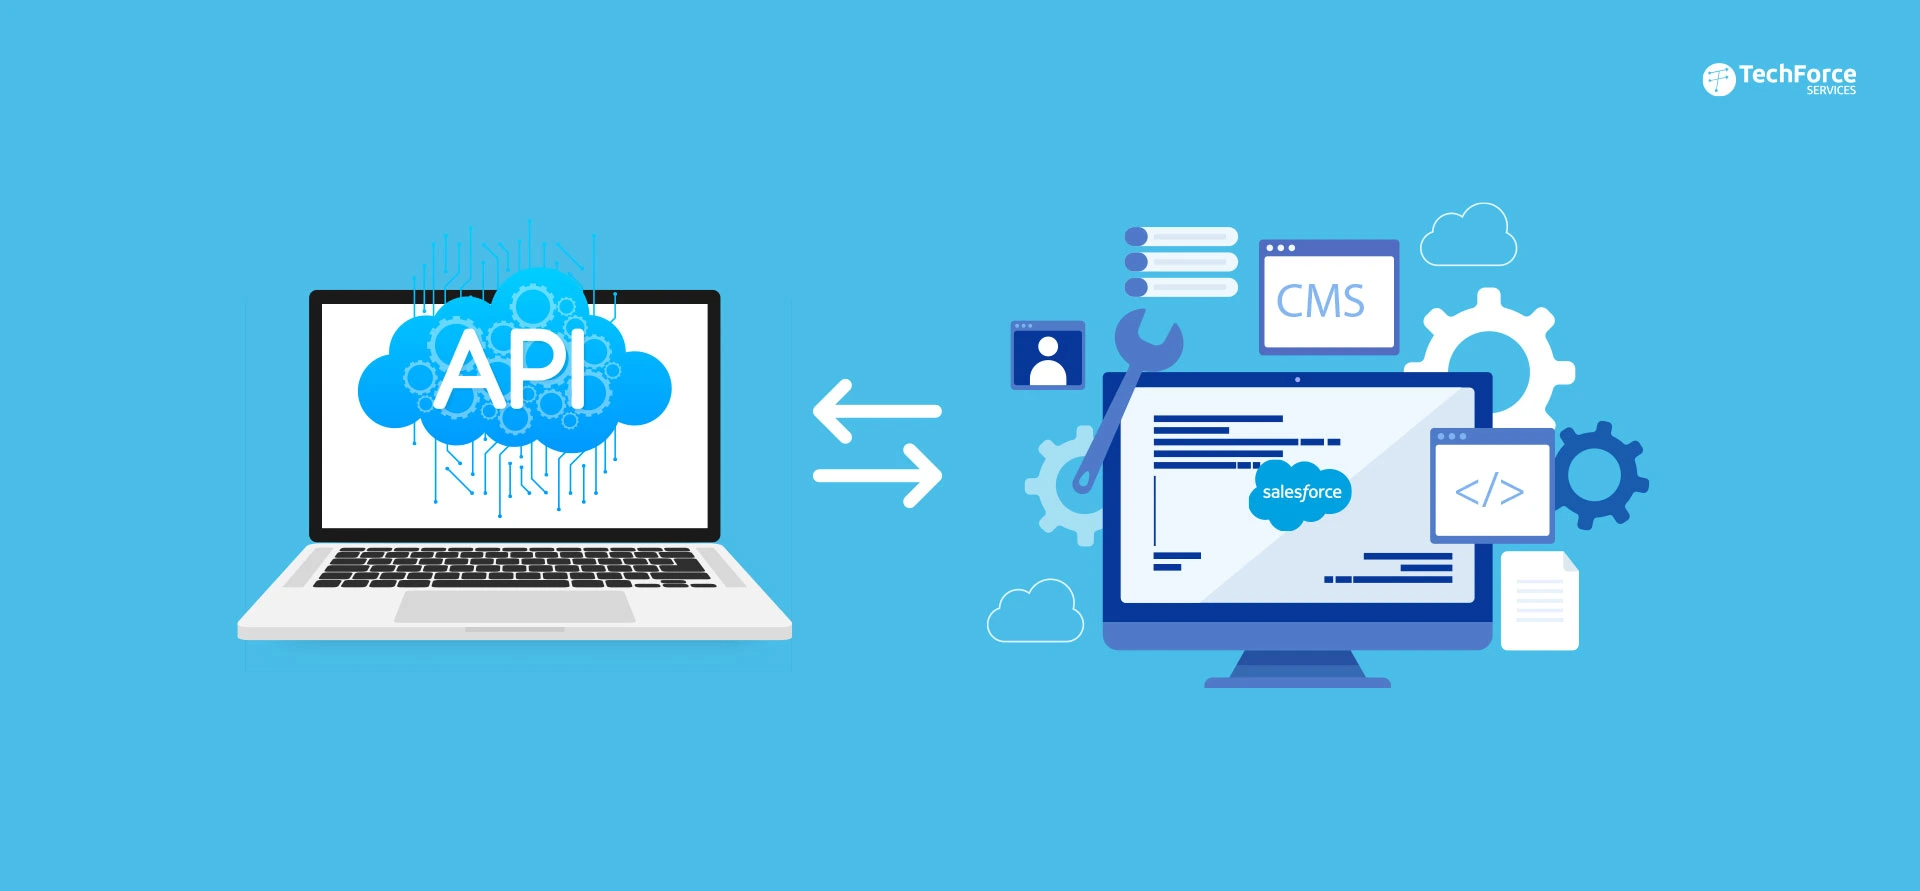 api-connection-with-salesforce-cms-from-postman-workbench-for-testing-output-part-3